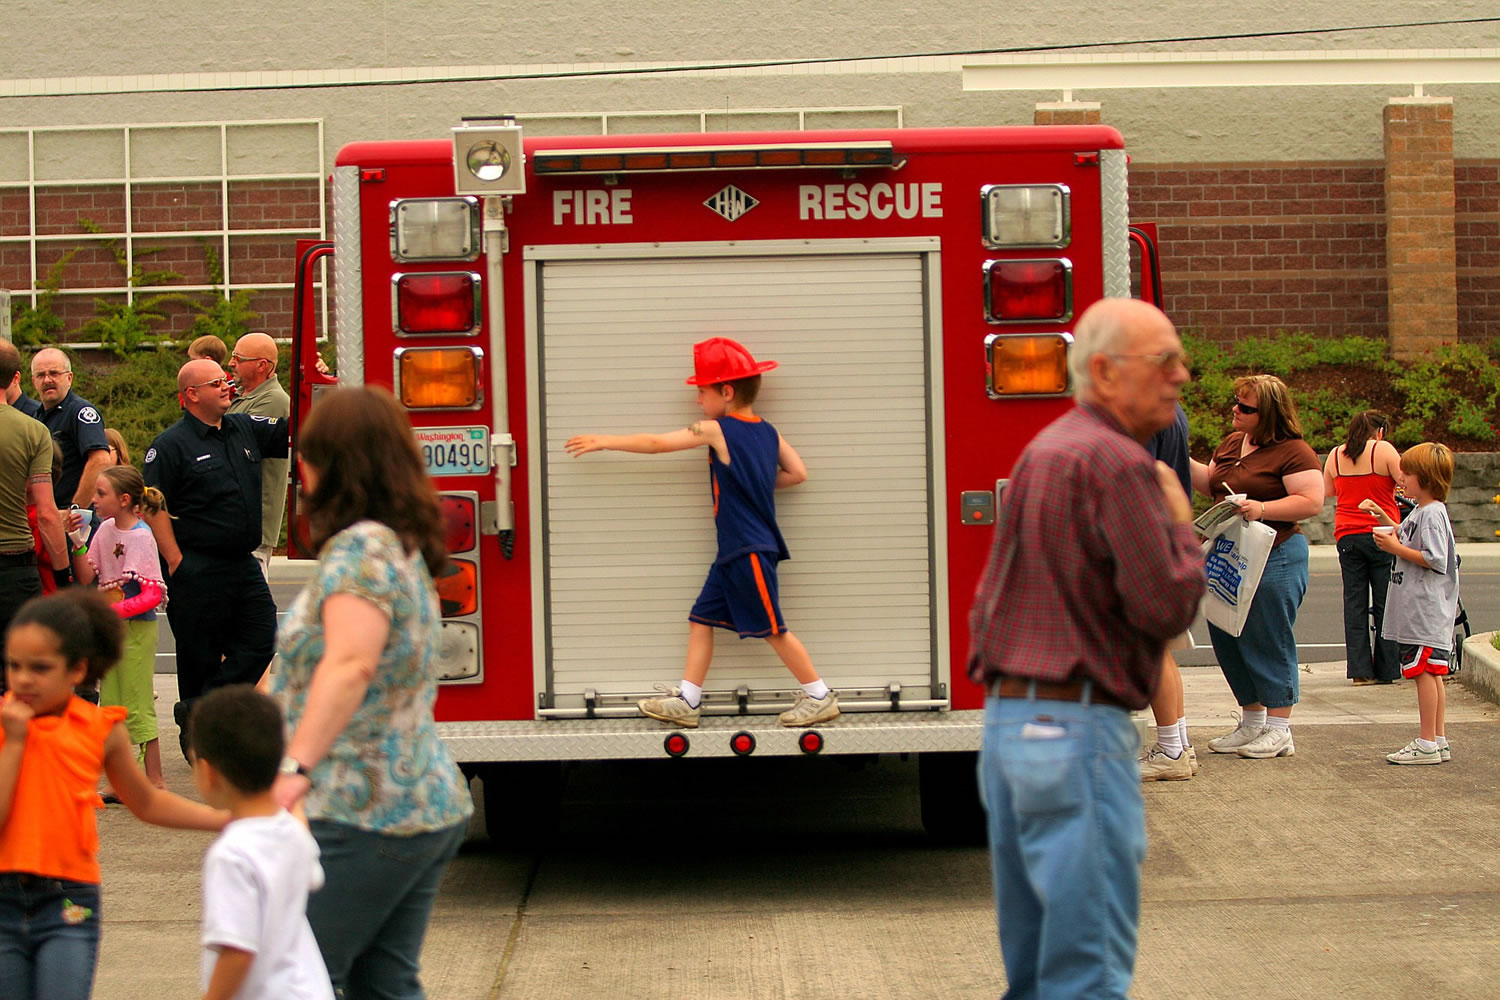 The Fire District 6 open house on June 6 features K9 rescue dogs, a visit from a Lifeflight helicopter, and countless fire safety related activities.